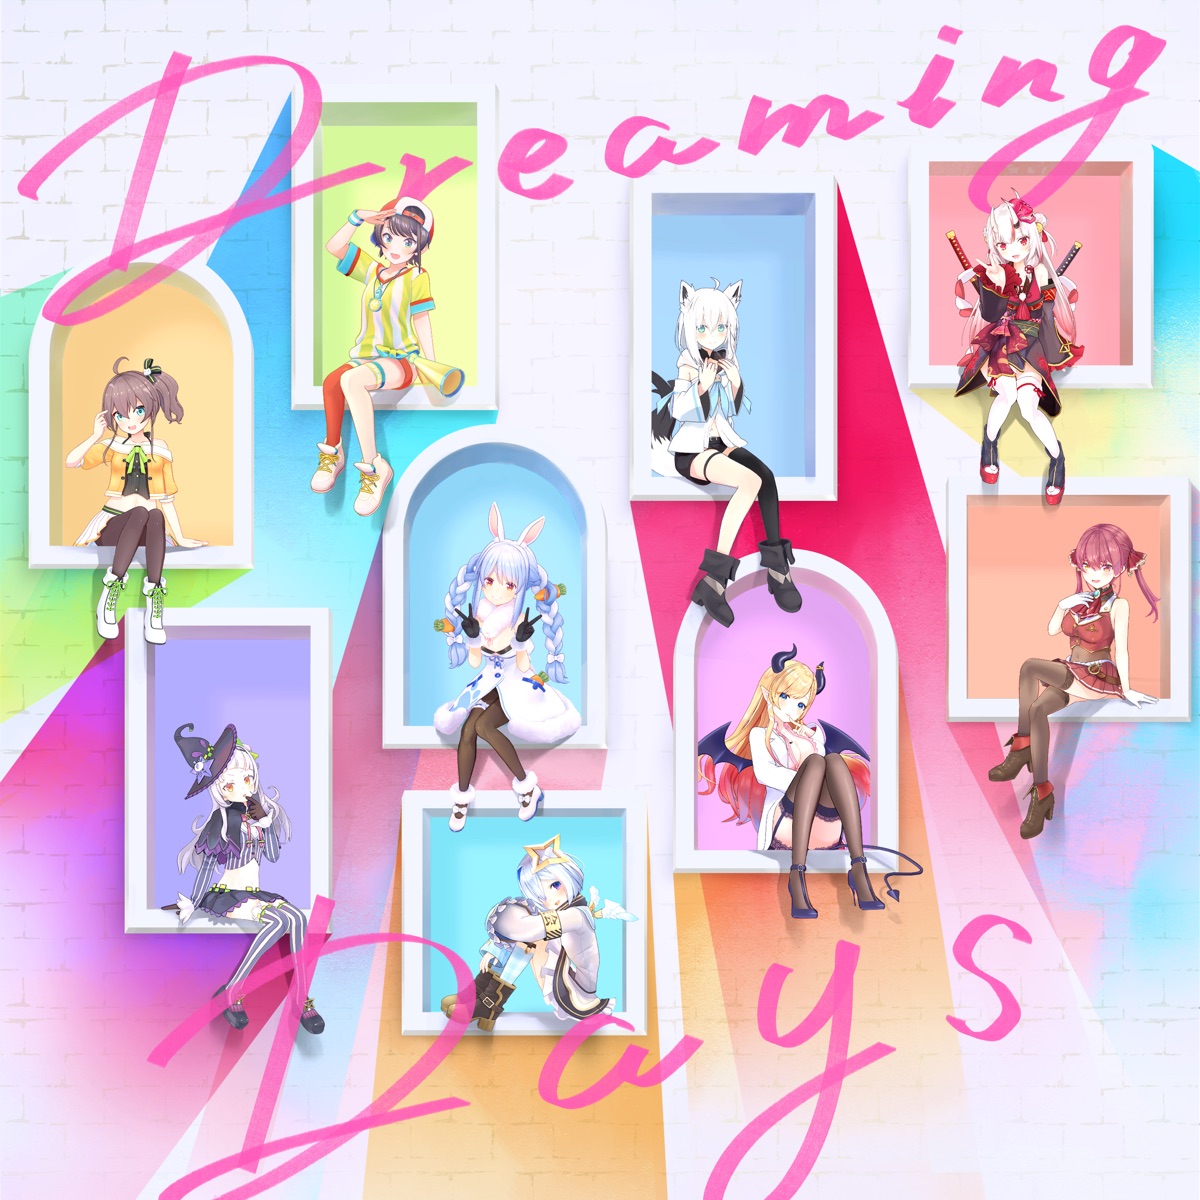 『hololive IDOL PROJECT - Dreaming Days』収録の『Dreaming Days』ジャケット